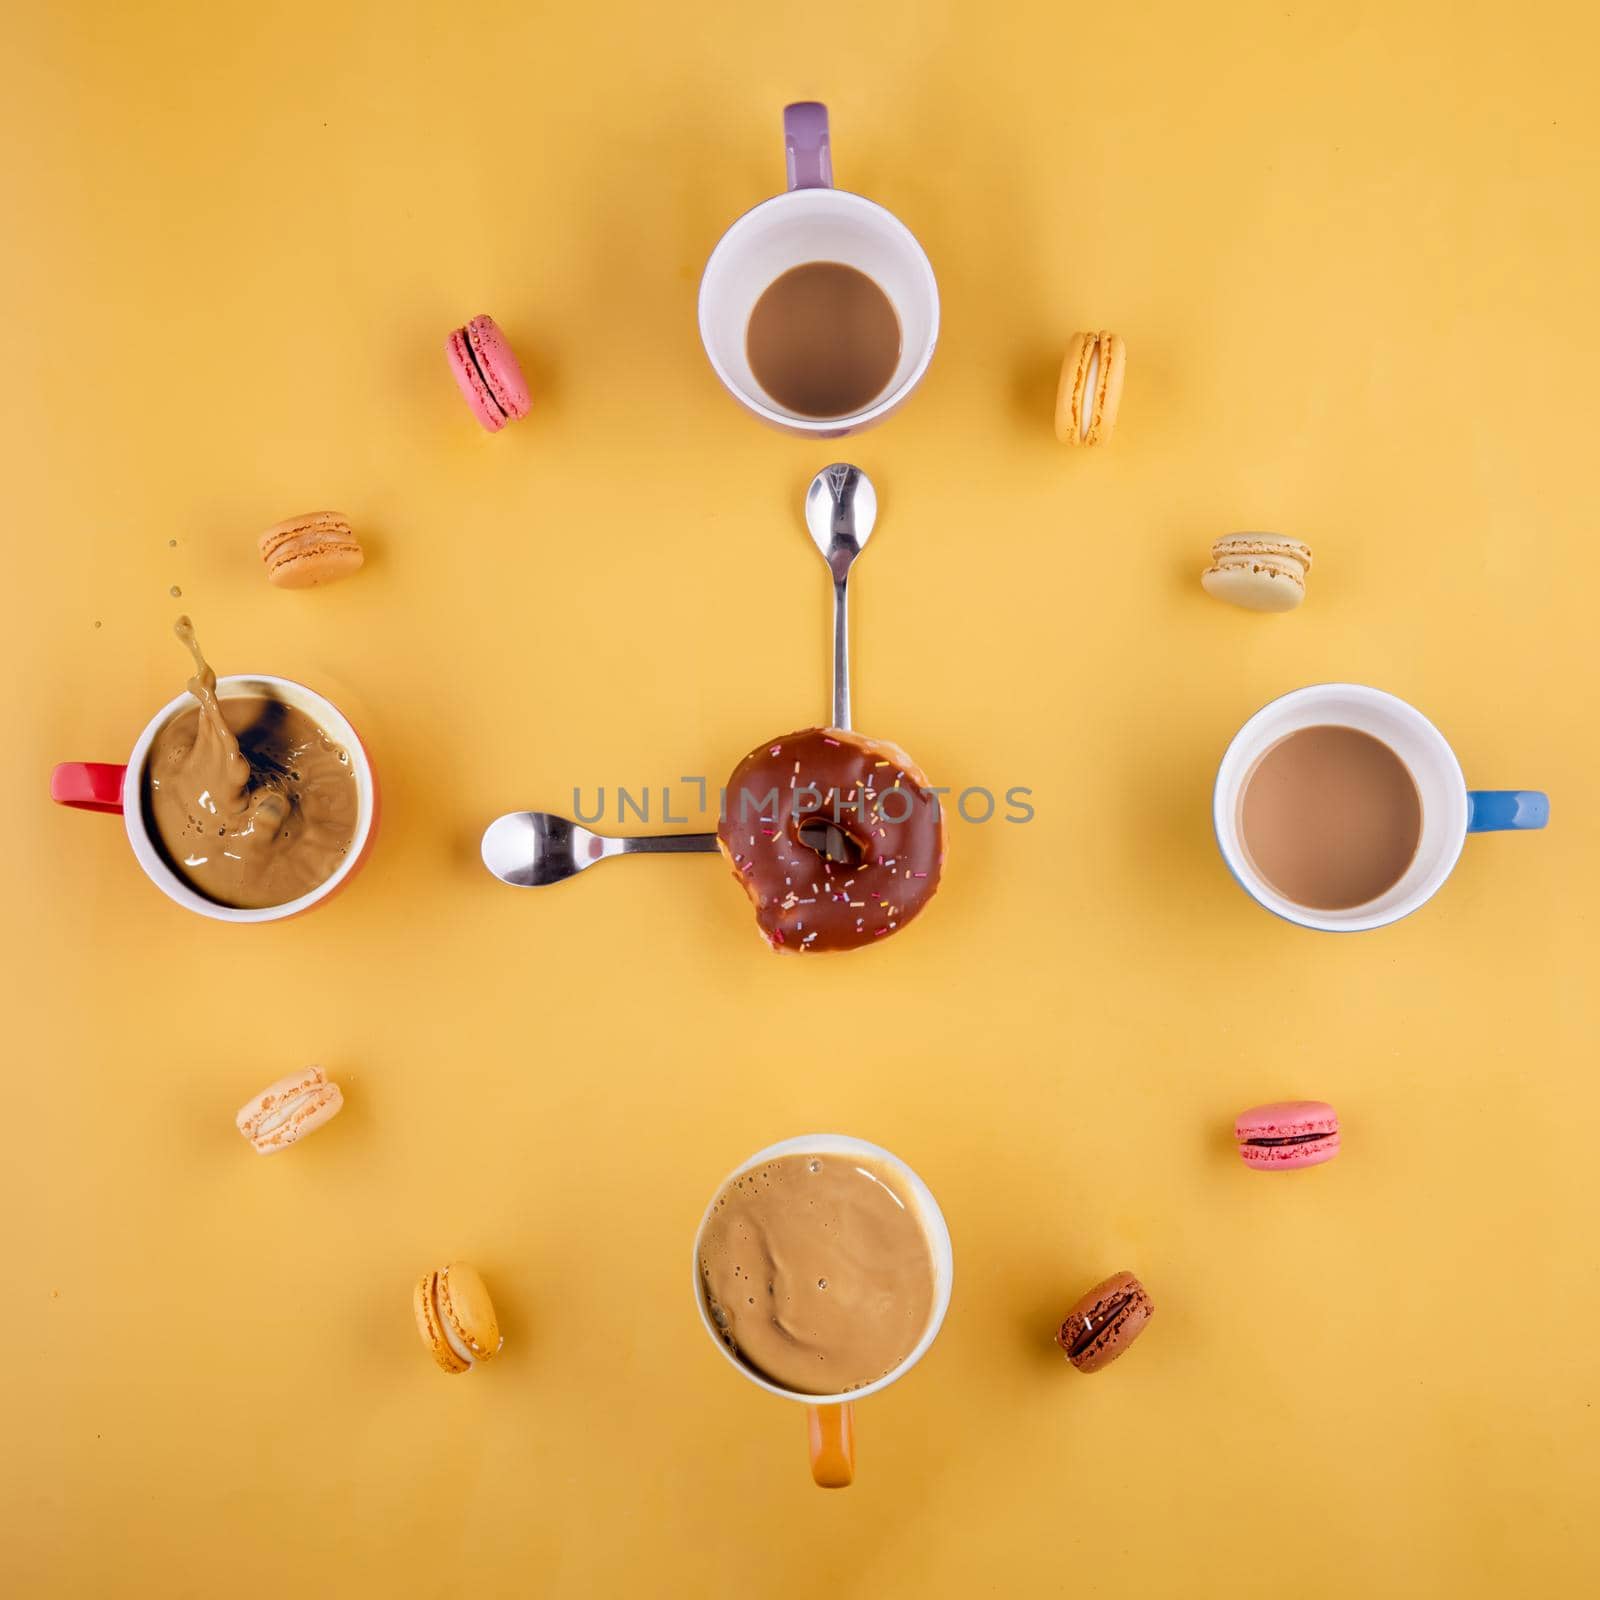 cups of coffee arranged like numbers in a clock, in the middle a donut and spoons like clock hands on yellow background